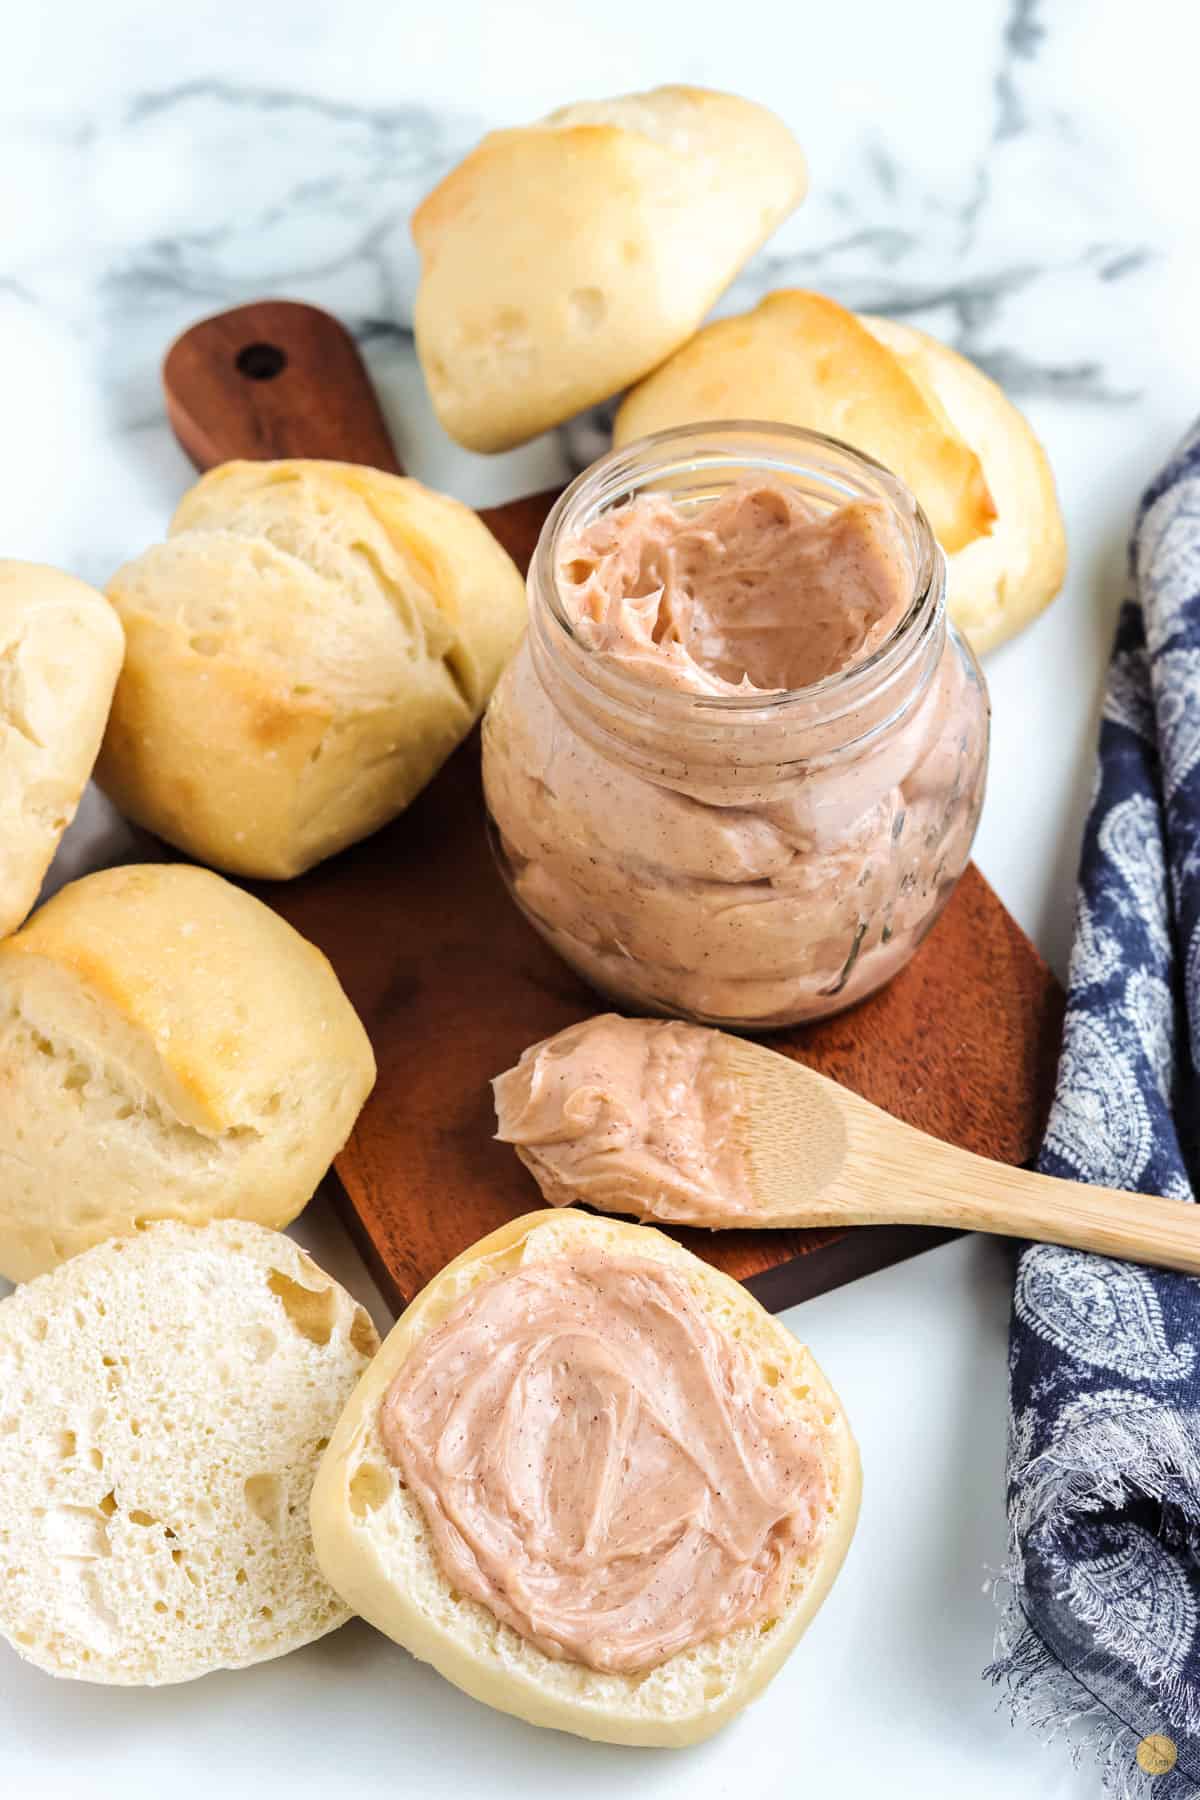 biscuits and a jar on a board